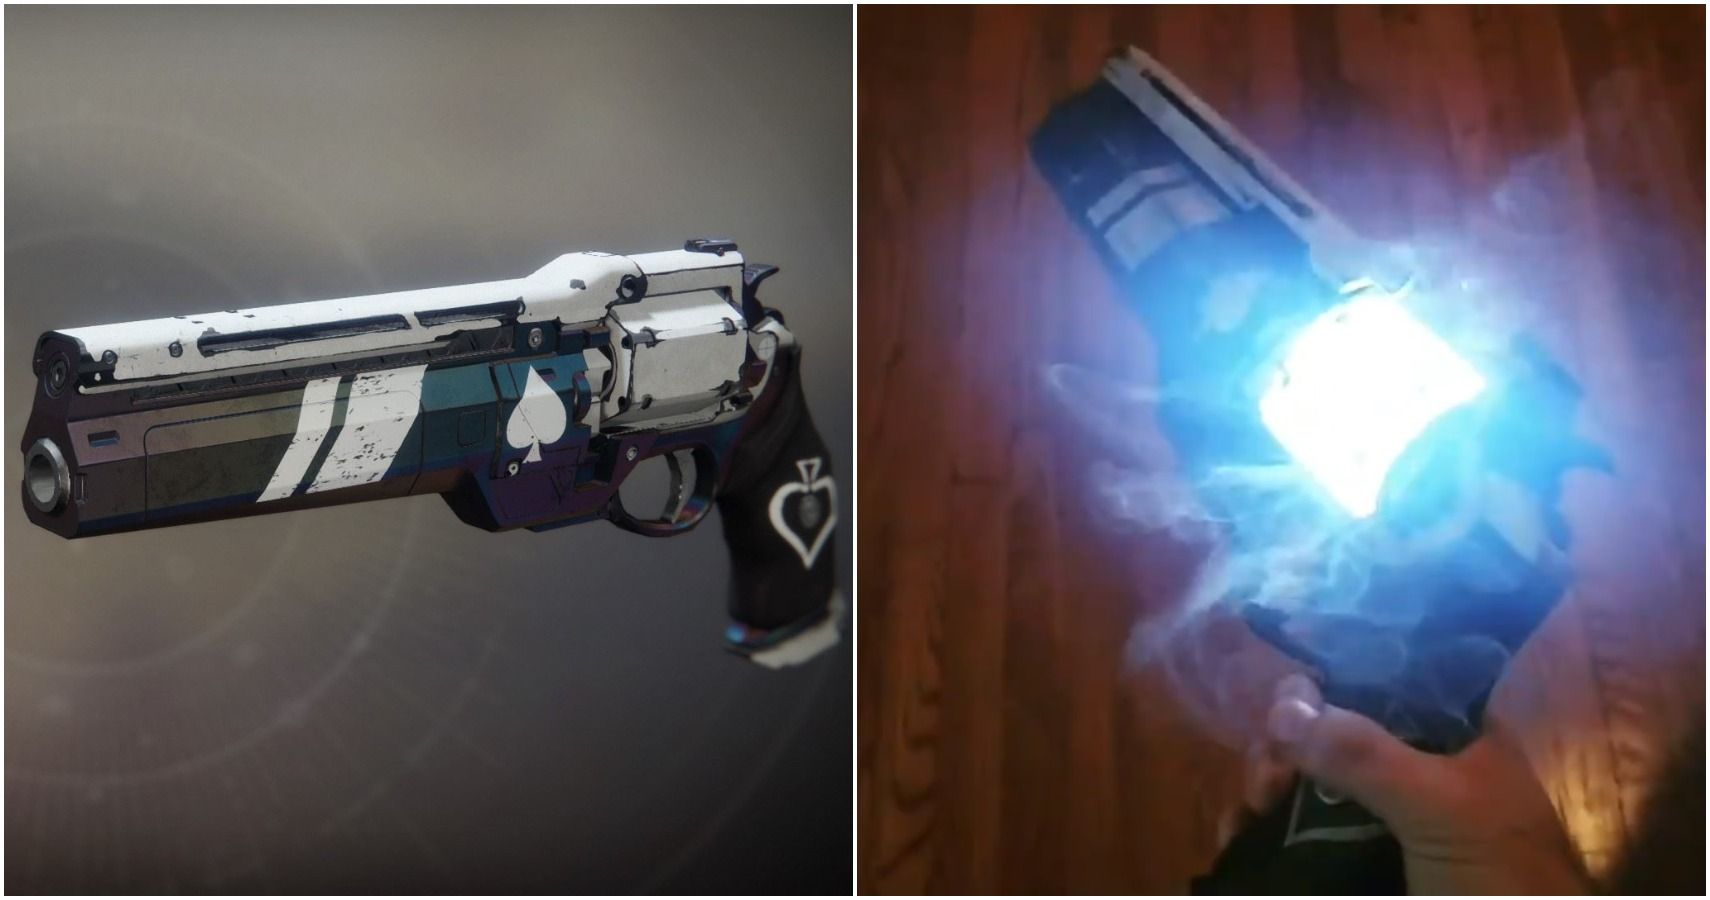 This Real Life Ace Of Spades From Destiny 2 Might Be The Coolest Prop Ever